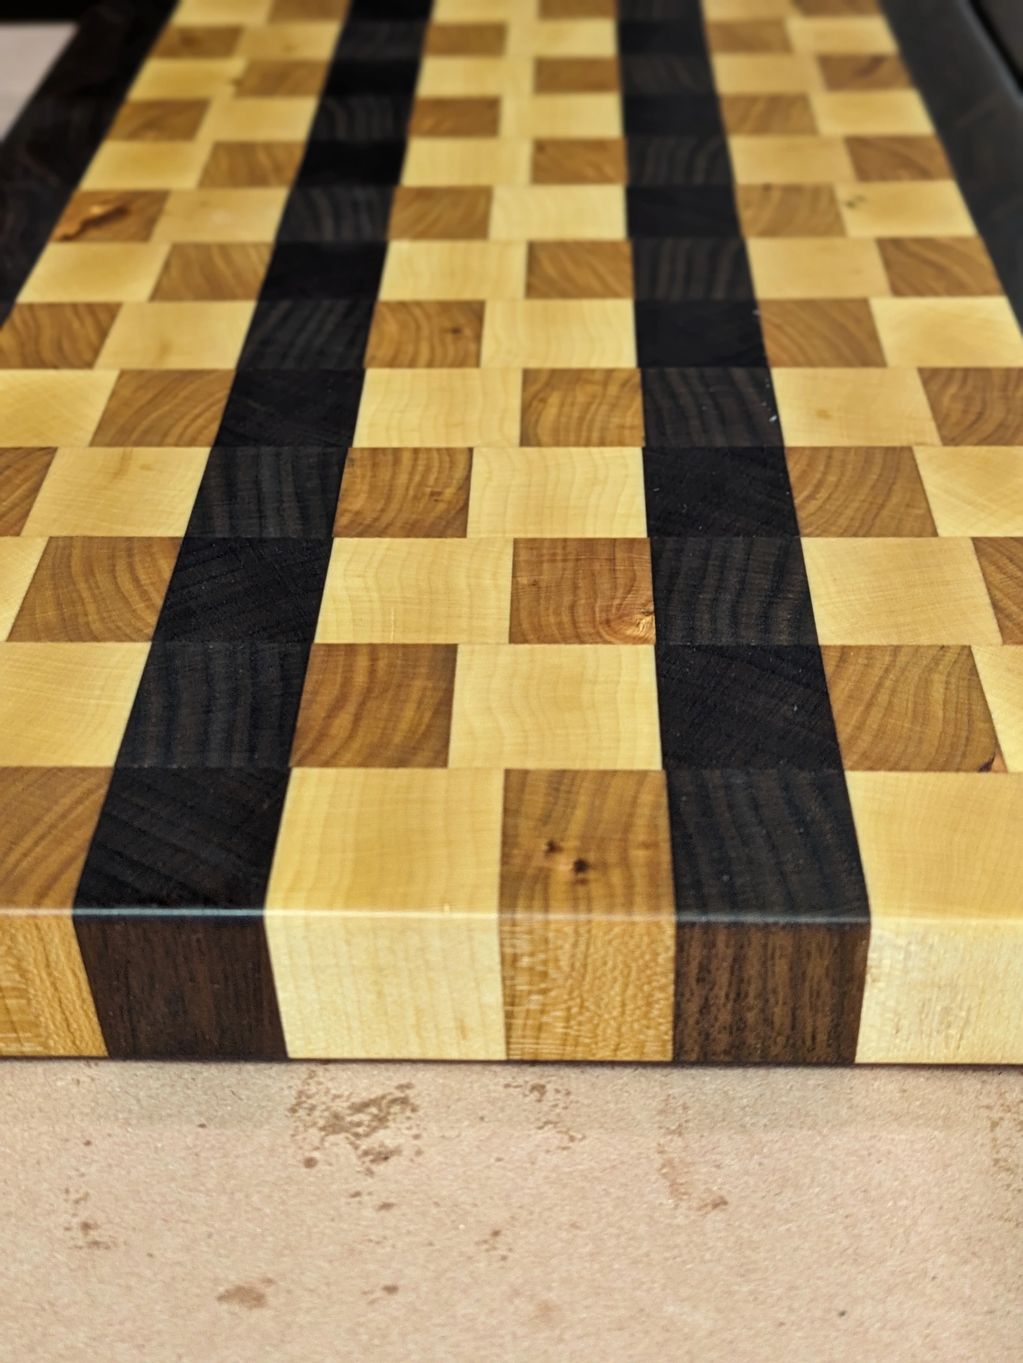 "Simon" is our gorgeous End Grain checkered pattern from our "End Grain Collection of Cutting Boards